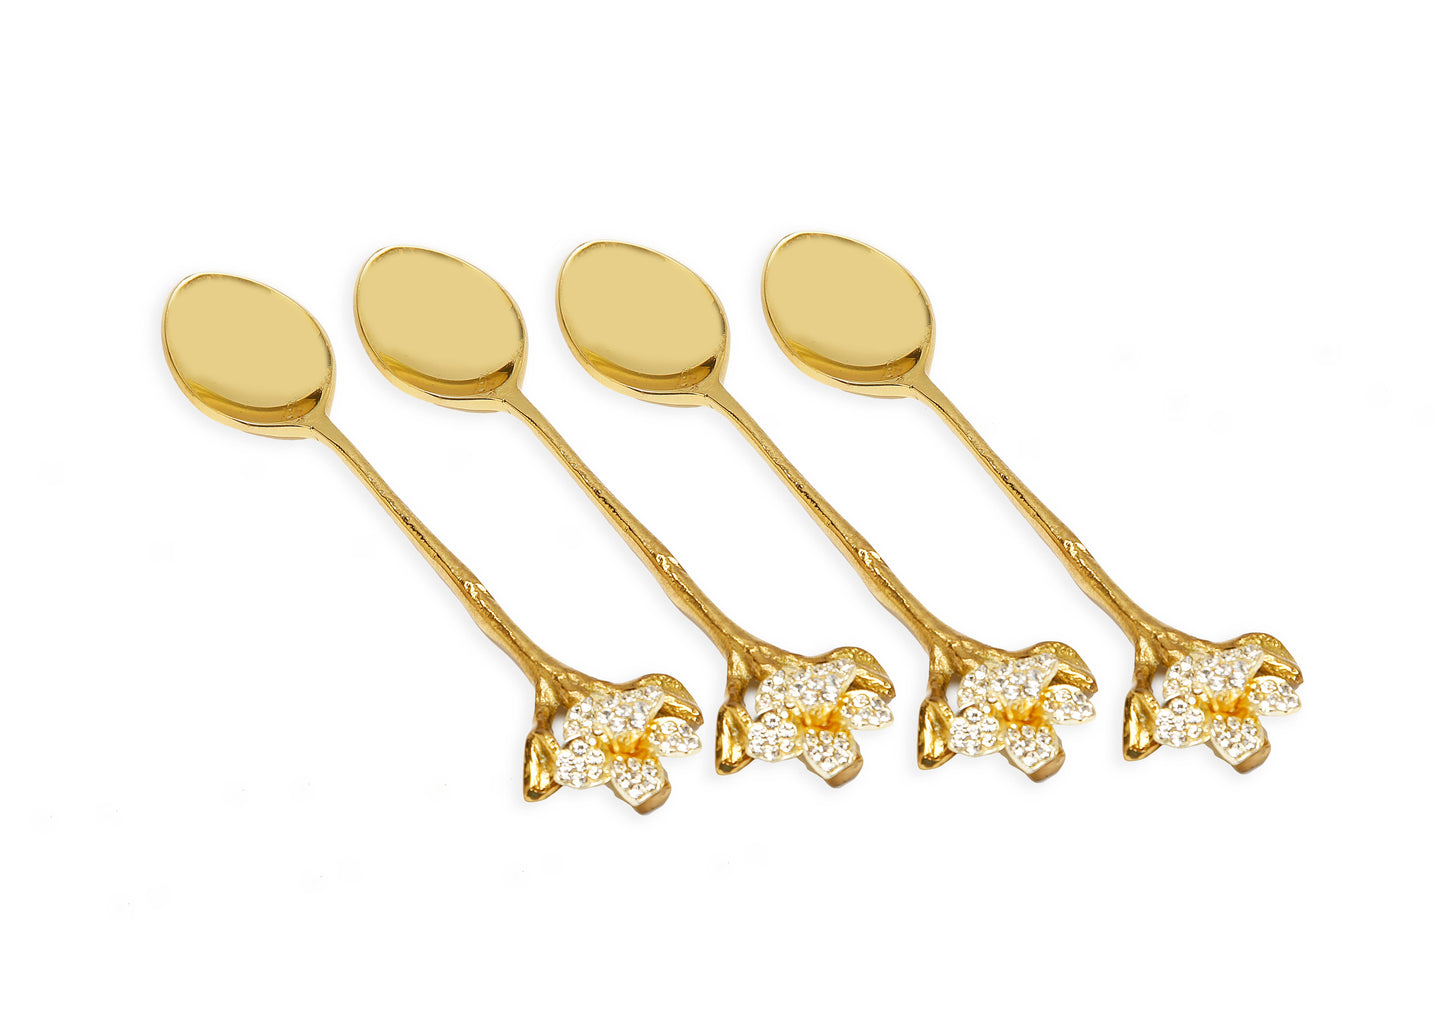 Gold Spoons with Jeweled Flowers - Set of Four